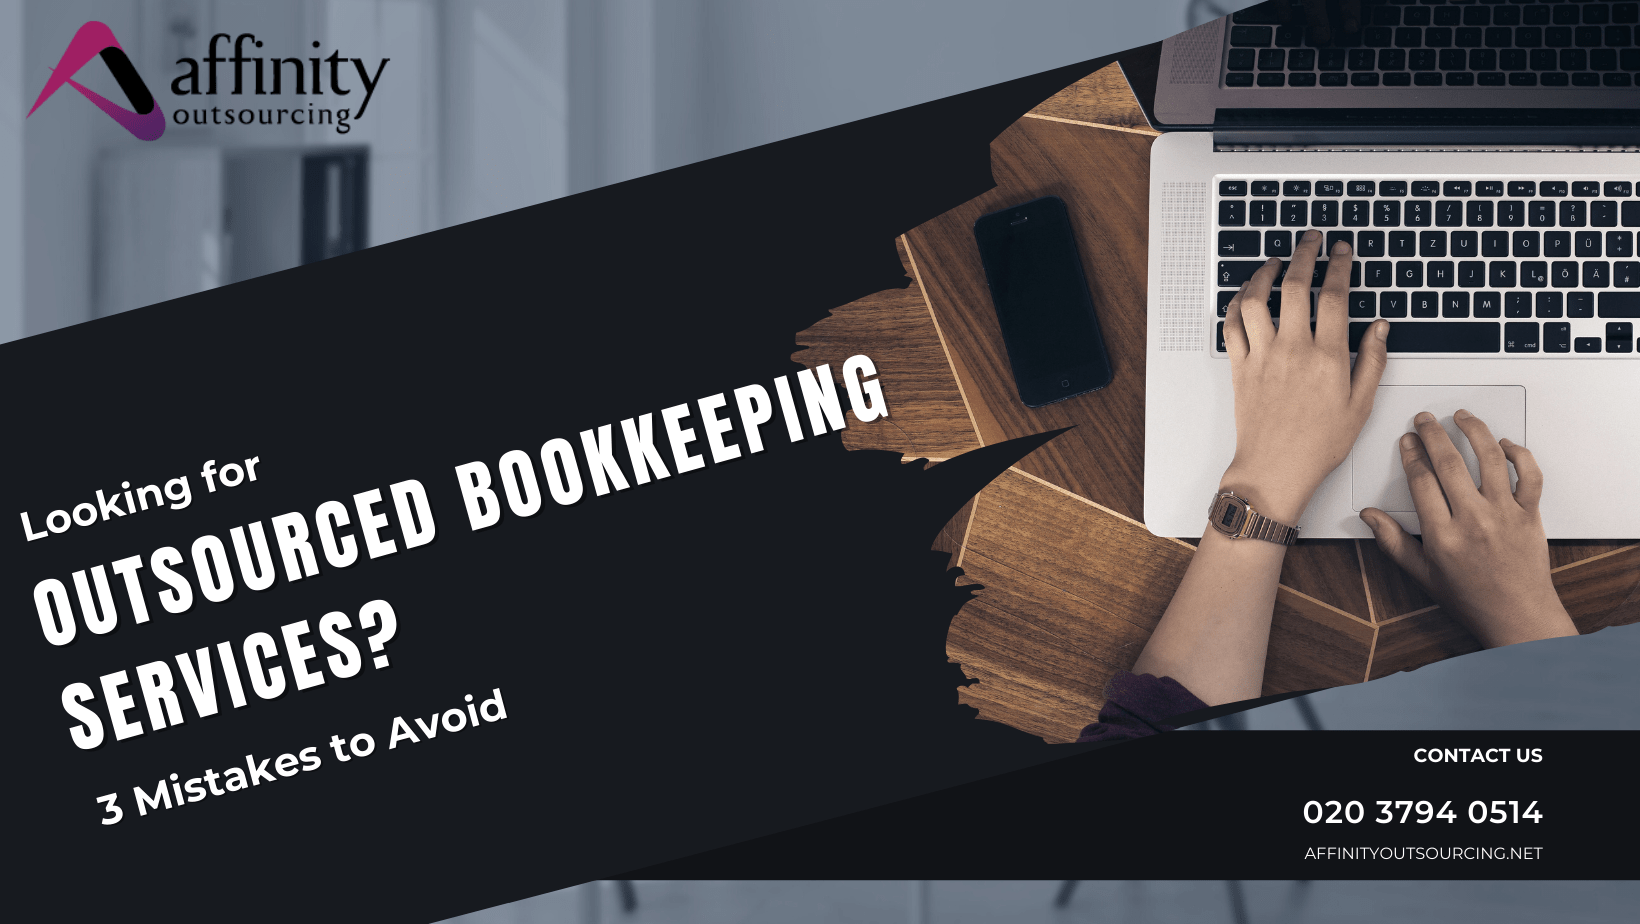 Looking for Outsourced Bookkeeping Services? 3 Mistakes to Avoid